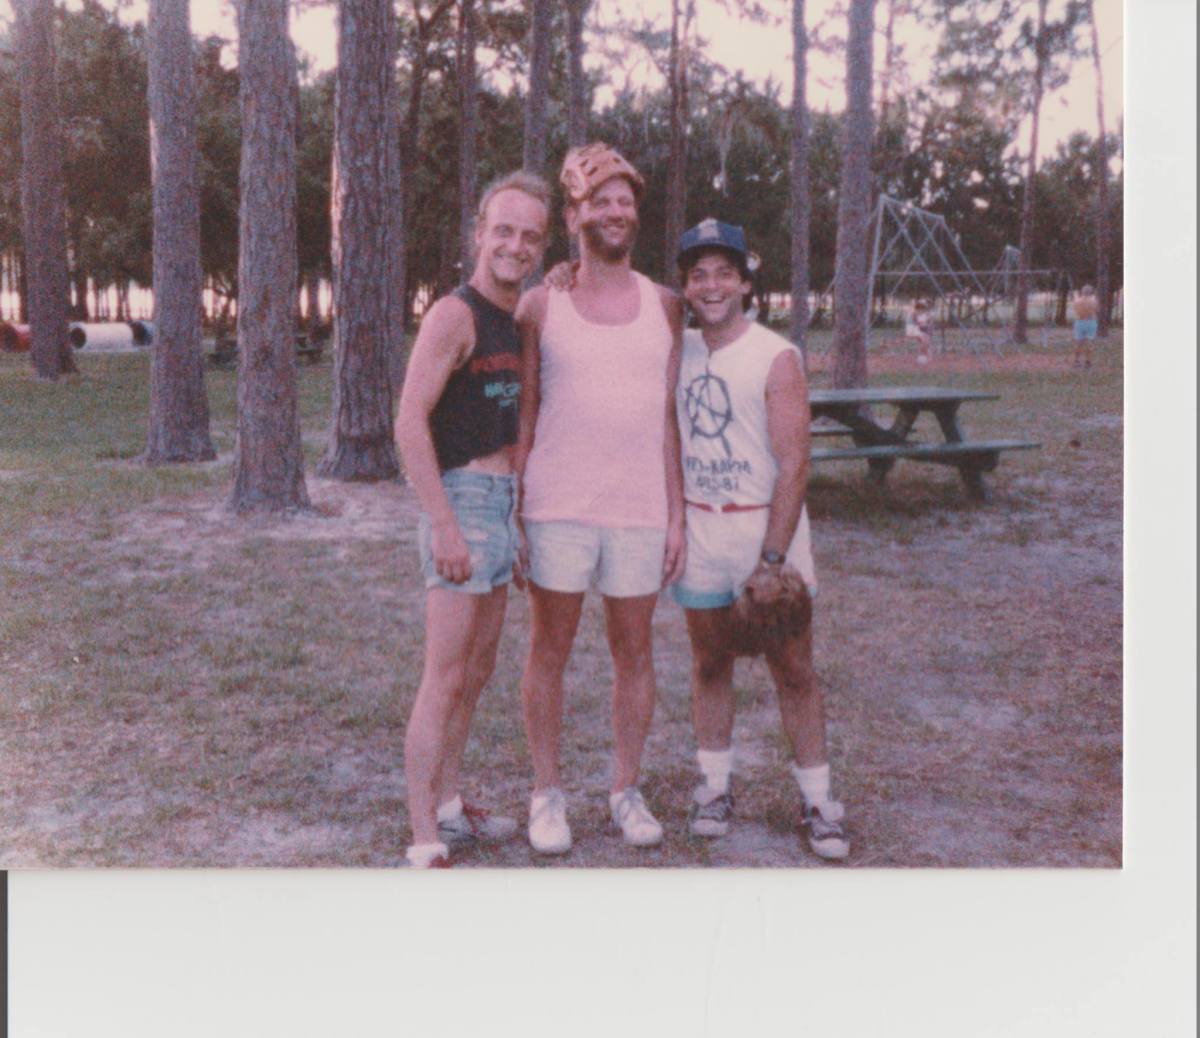 Randy Brown, Jimmy Schrader, and Mike Herrera play softball (1987, Clearwater, Florida) 